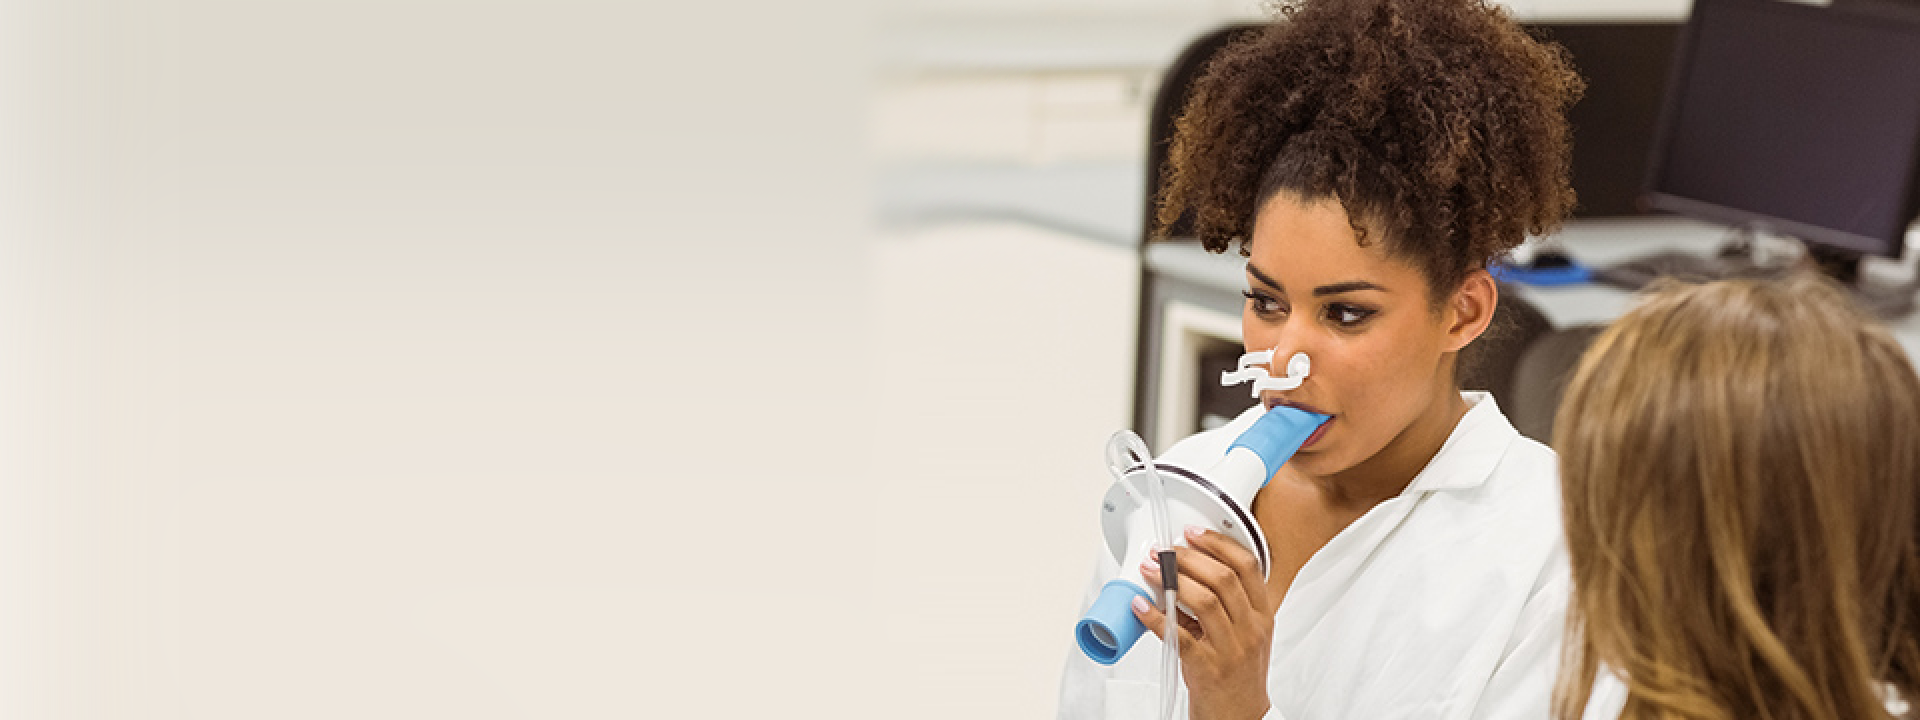 How to Use a Spirometer